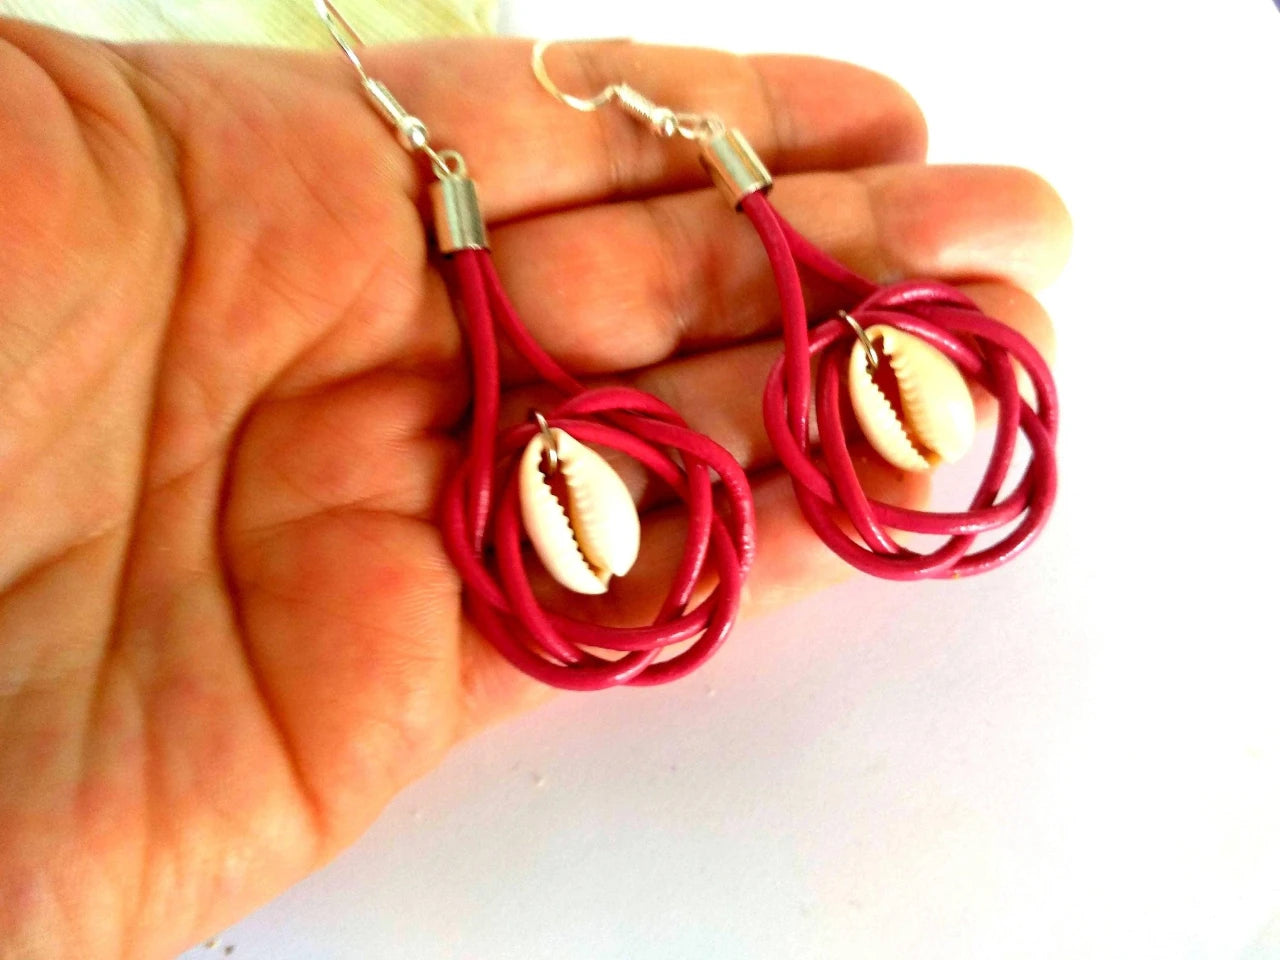 Leather and silver earrings with sea shell